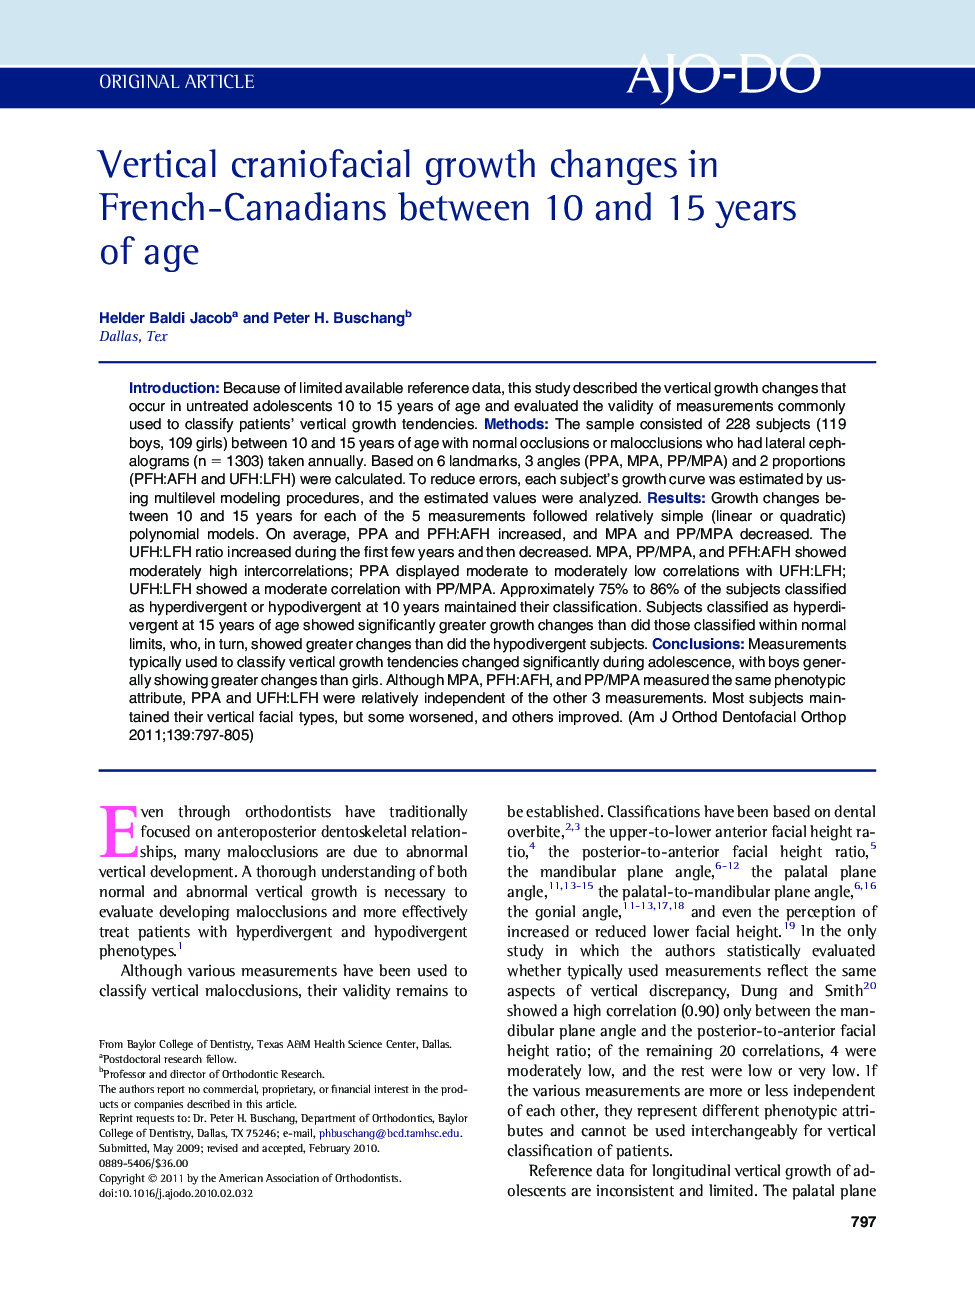 Vertical craniofacial growth changes in French-Canadians between 10 and 15 years of age 